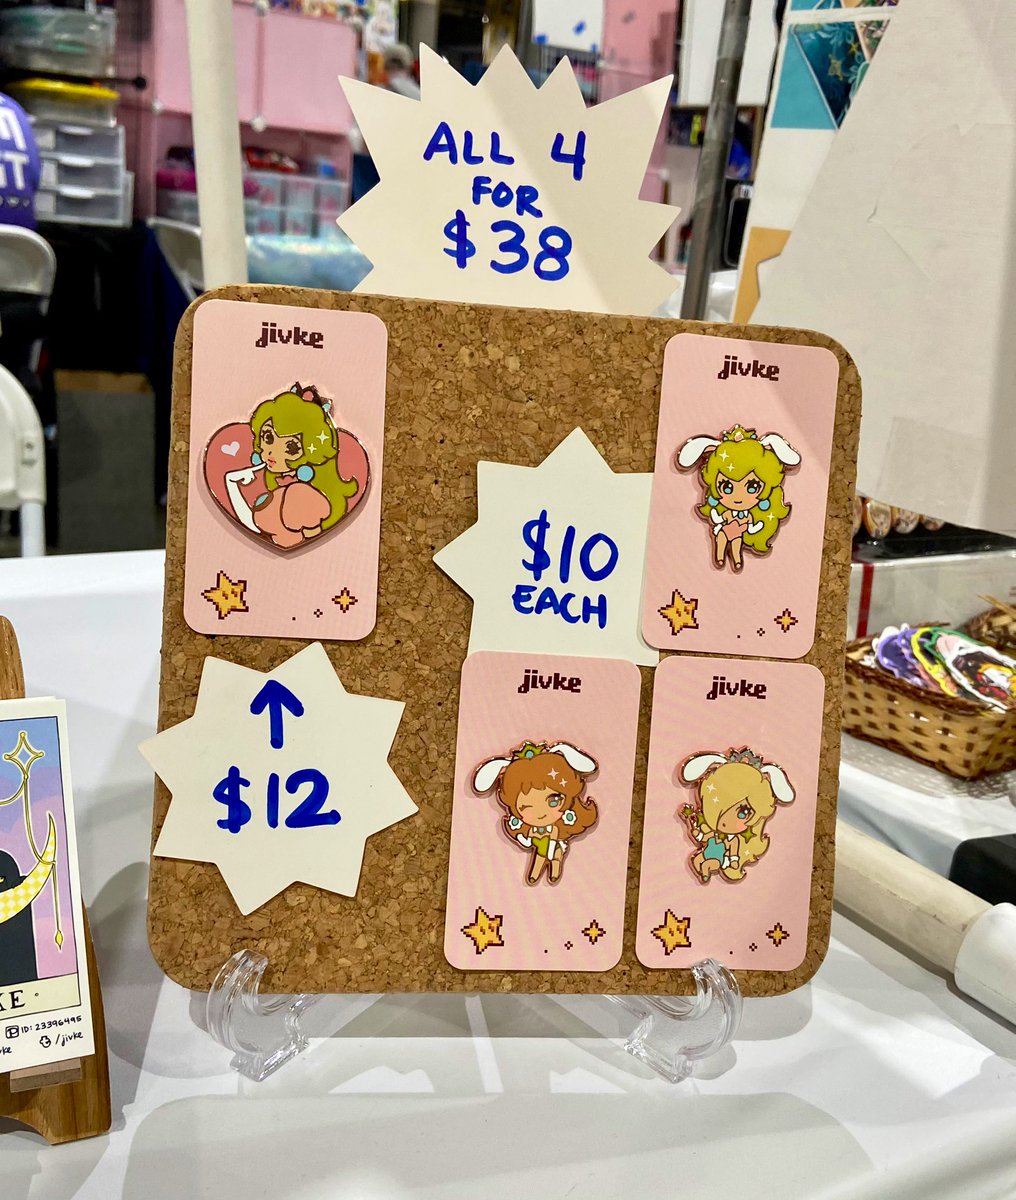 i'm at table H34 at AX this year! #AX2022ArtistAlley #AX2022 
i haven't been able to draw much this year, but at least i get to debut my first enamel pins!